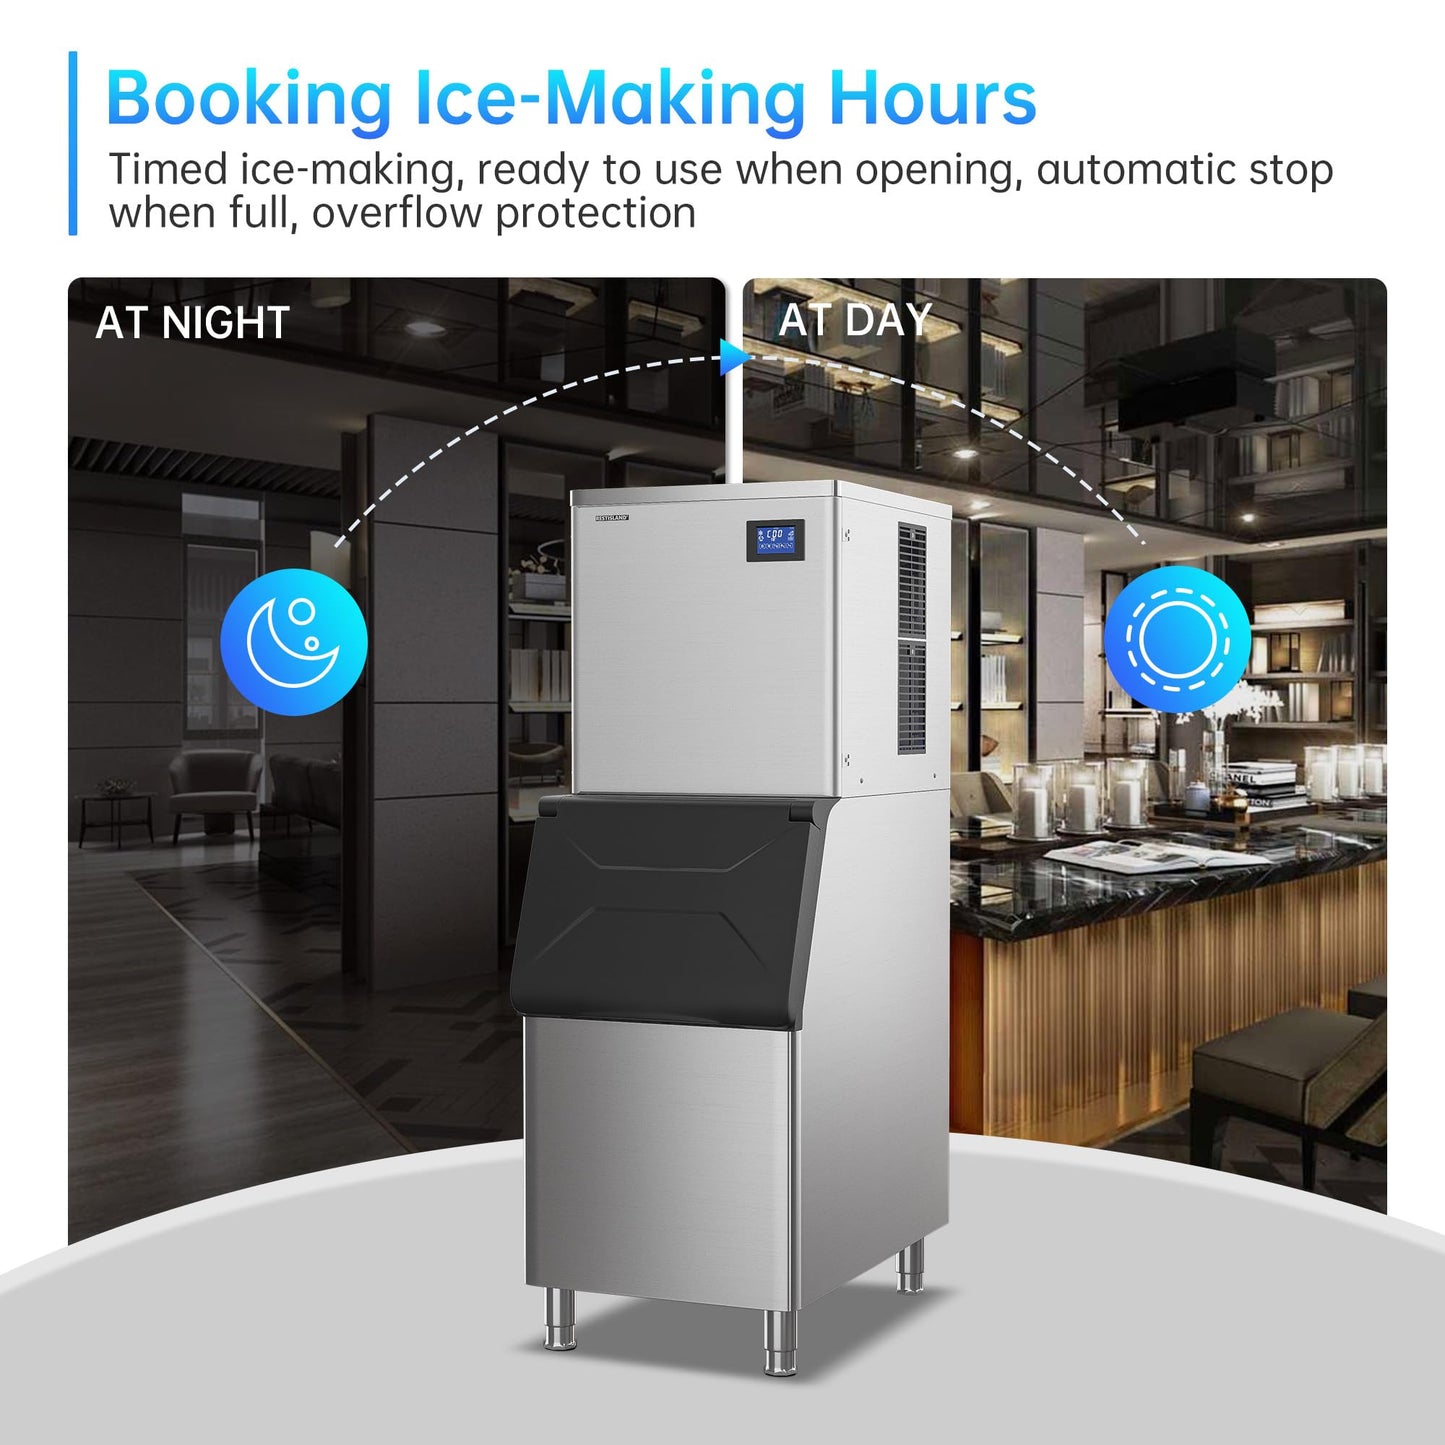 RESTISLAND Commercial Ice Maker Machine, 400 lbs /24 h, 330 lbs Storage Bin, Stainless Steel, Automatic Cleaning, Blue Ray, Perfect for Bar or Business, Includes Ice Shovel, Connection Hose